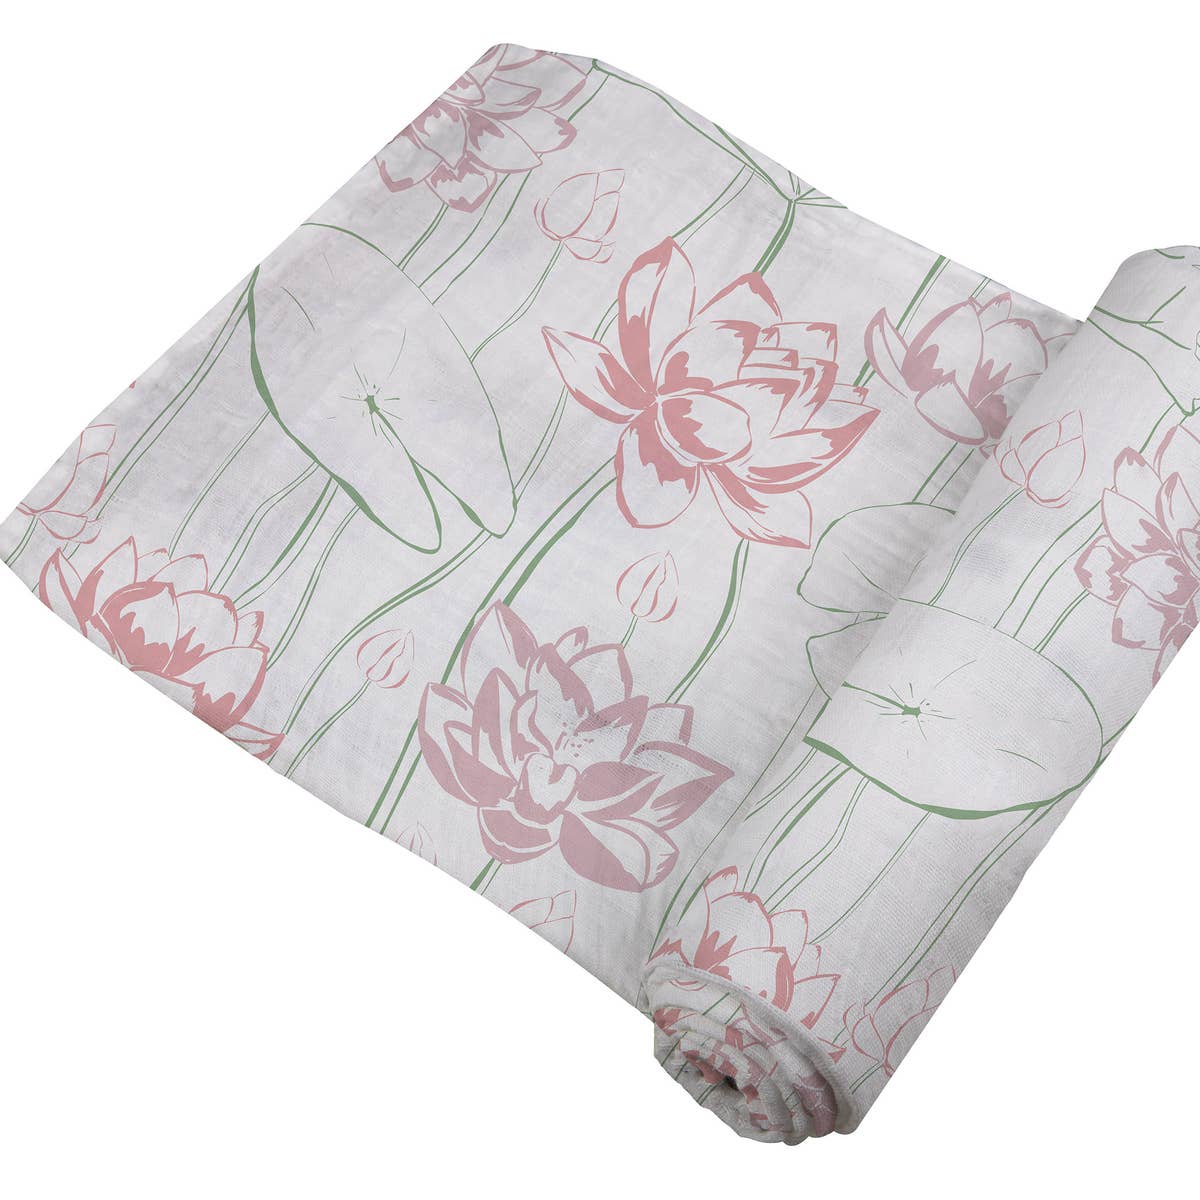 Newcastle Classics Bamboo Muslin Swaddle Blanket - Water Lily